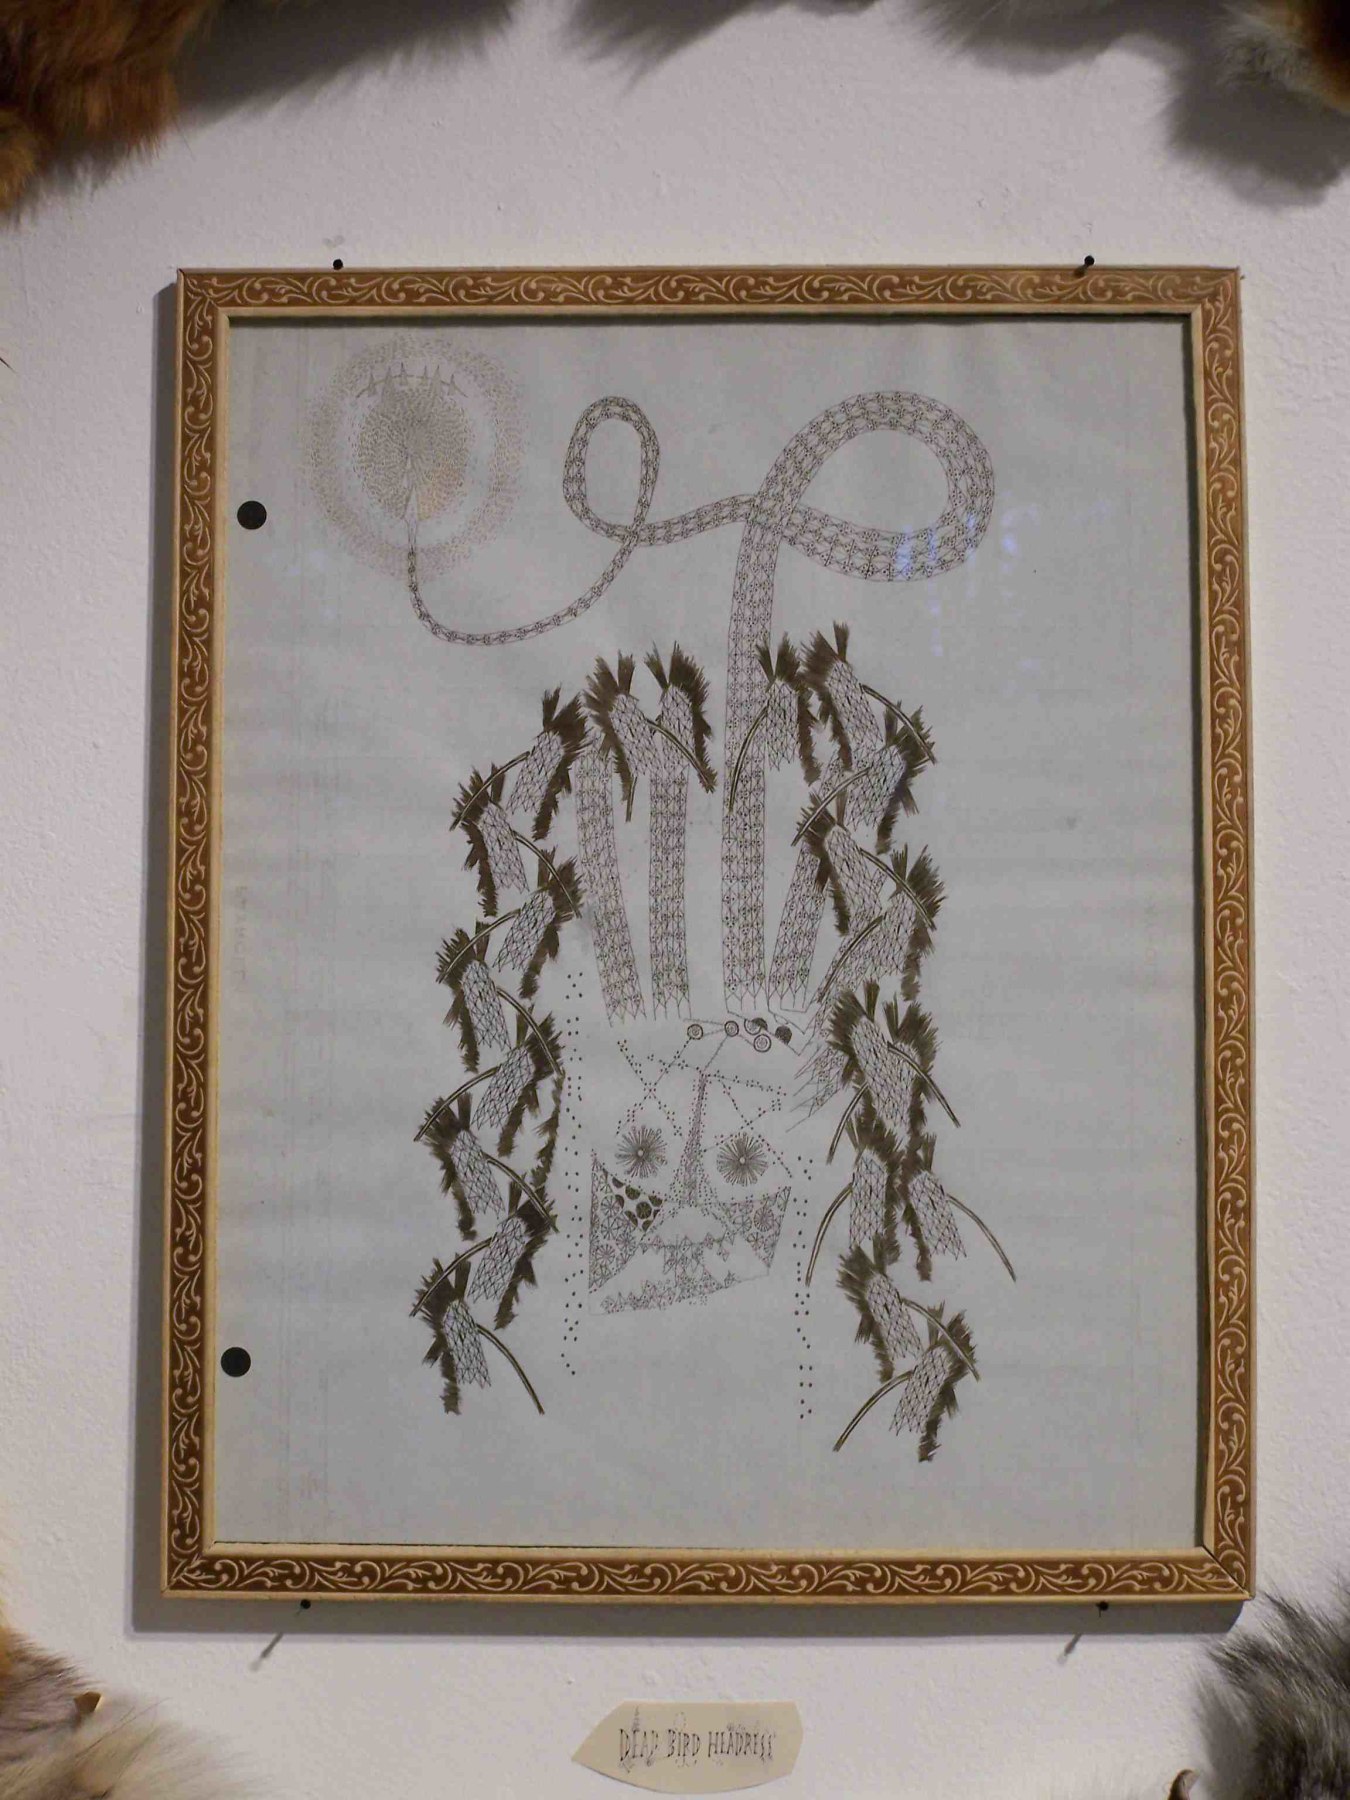 Framed scorpion drawing surrounded by fur on gallery wall